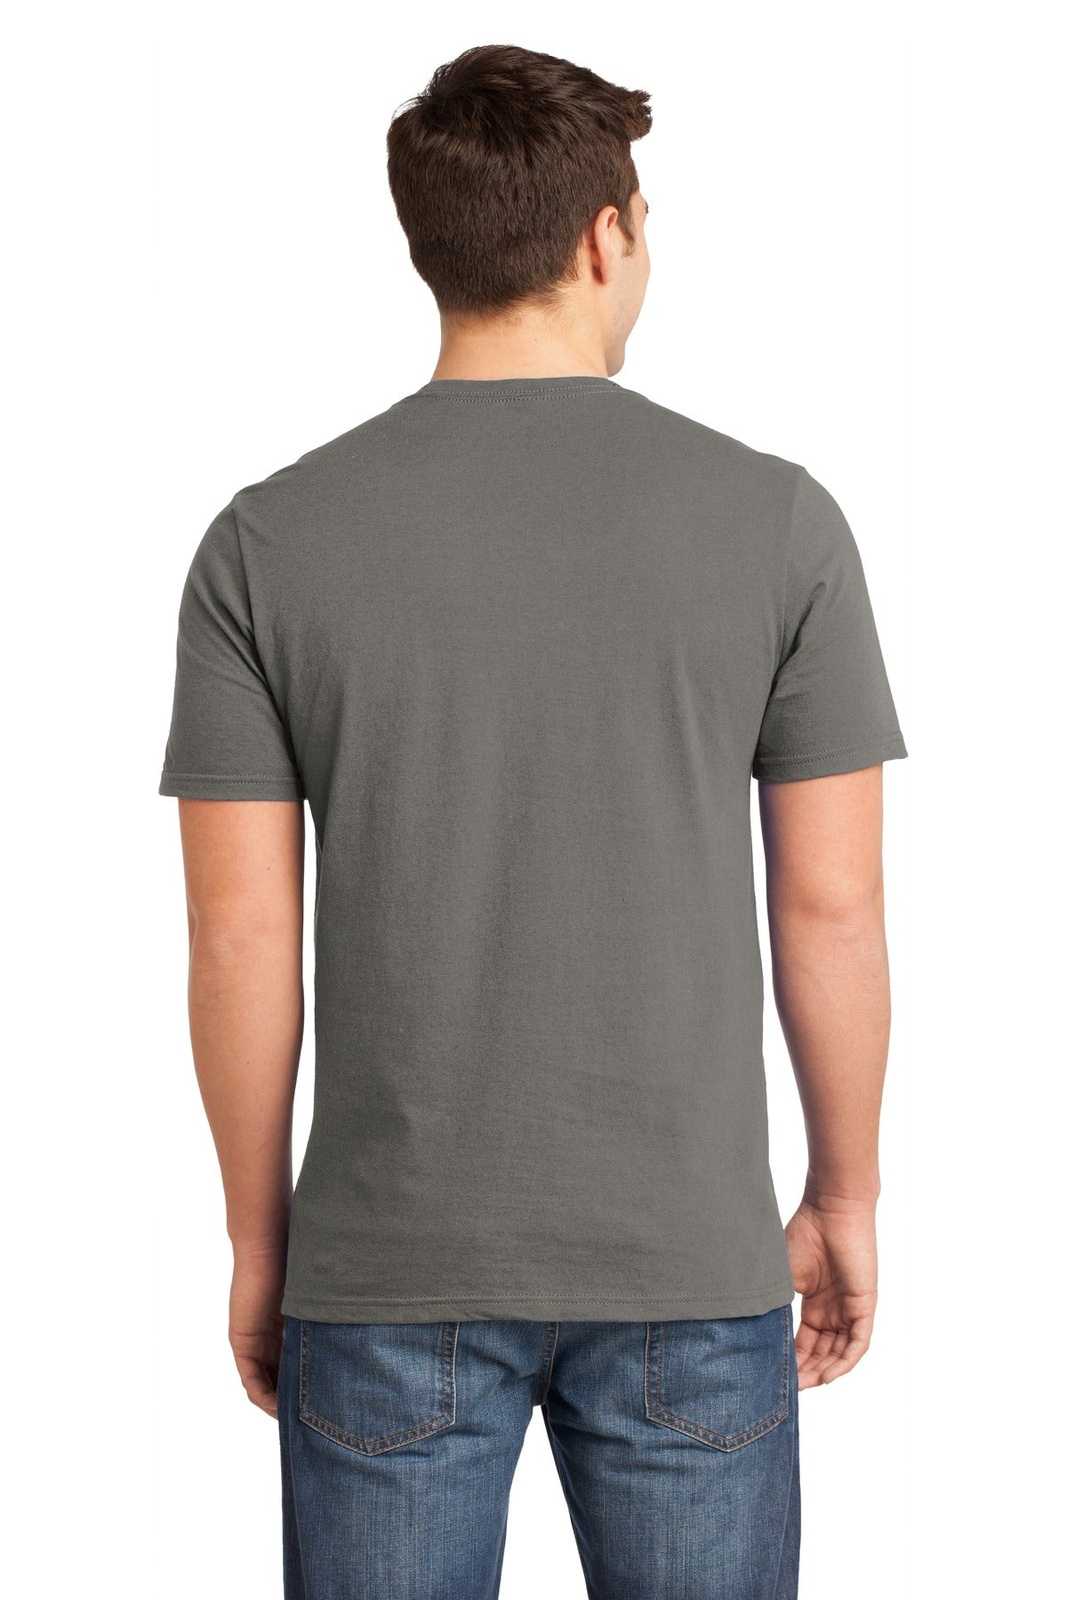 District DT6000 Very Important Tee - Gray - HIT a Double - 1